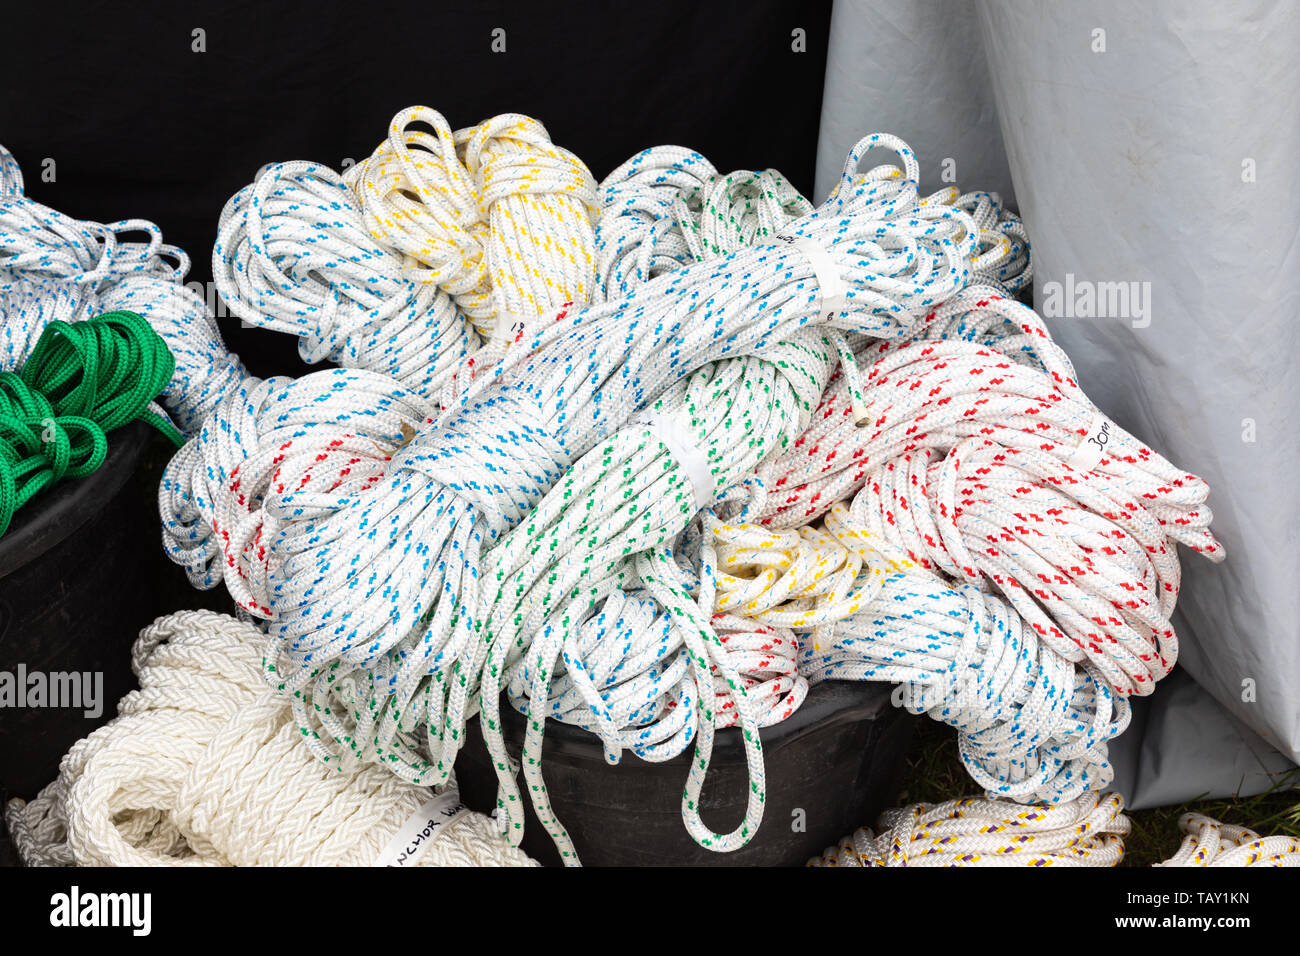 Crick, Northamptonshire, UK: Skeins of white nylon rope with coloured flecks placed haphazardly in a black bucket. Stock Photo